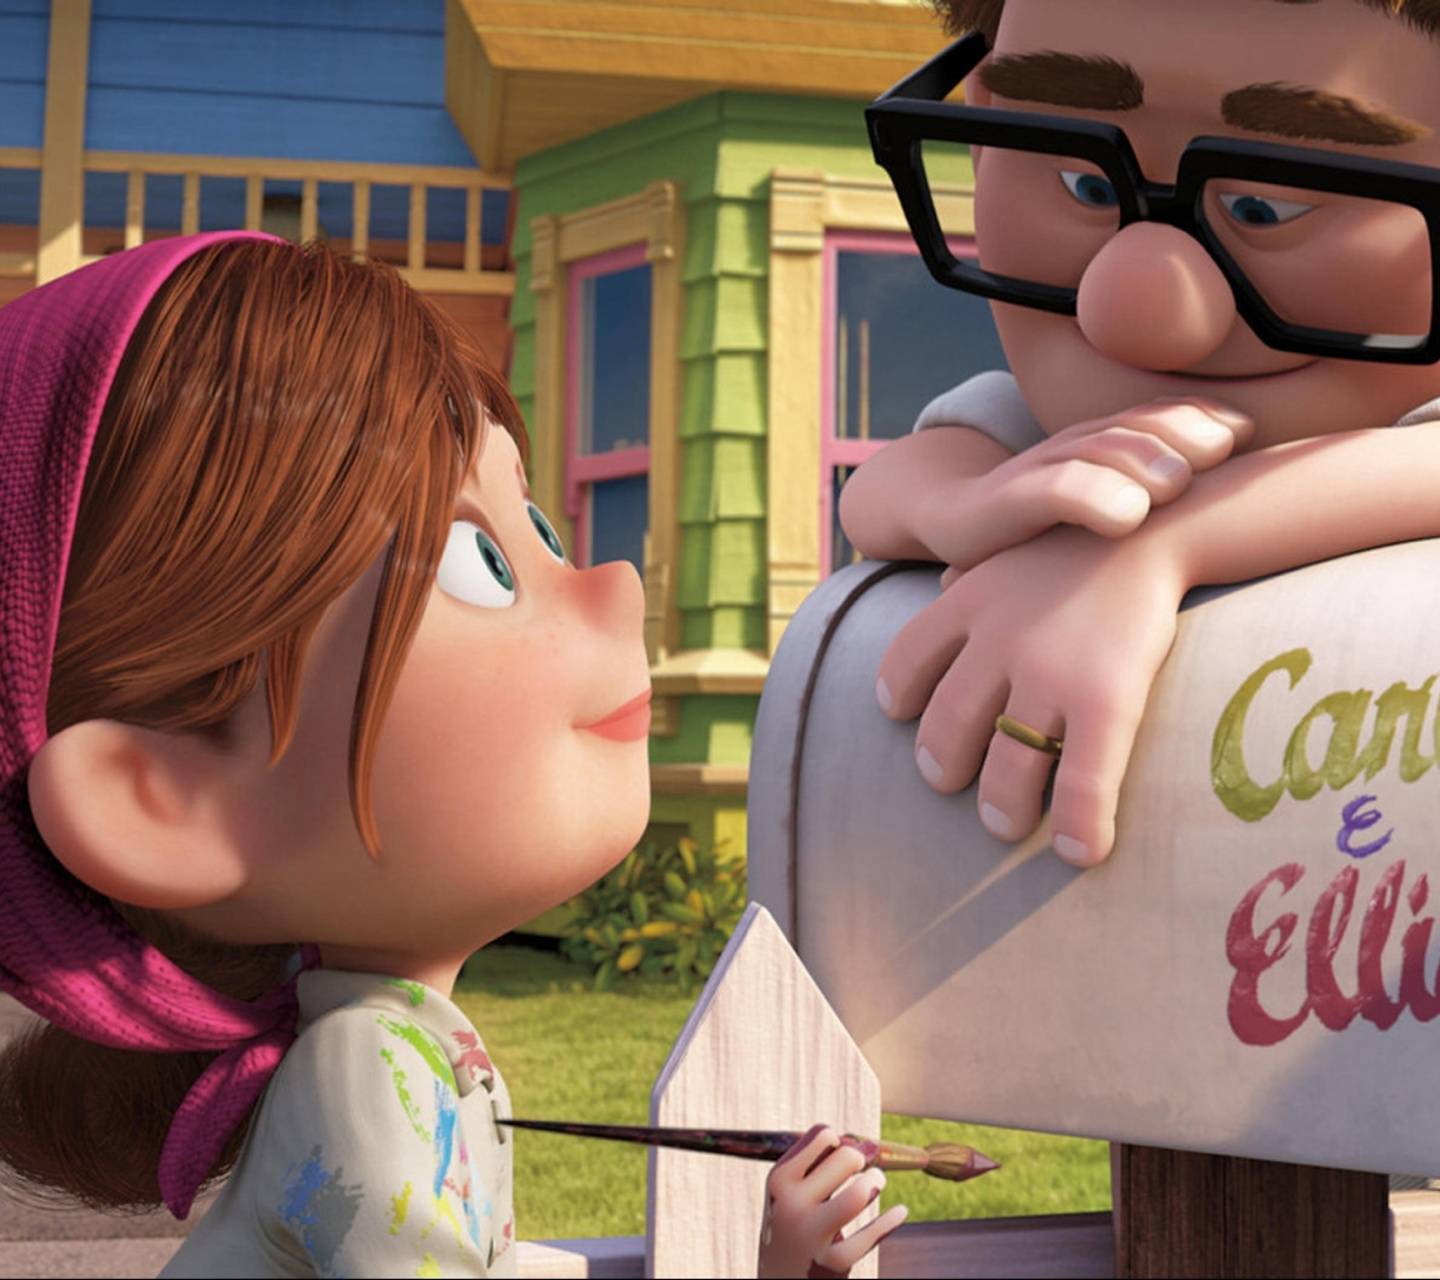 carl and ellie from up collage